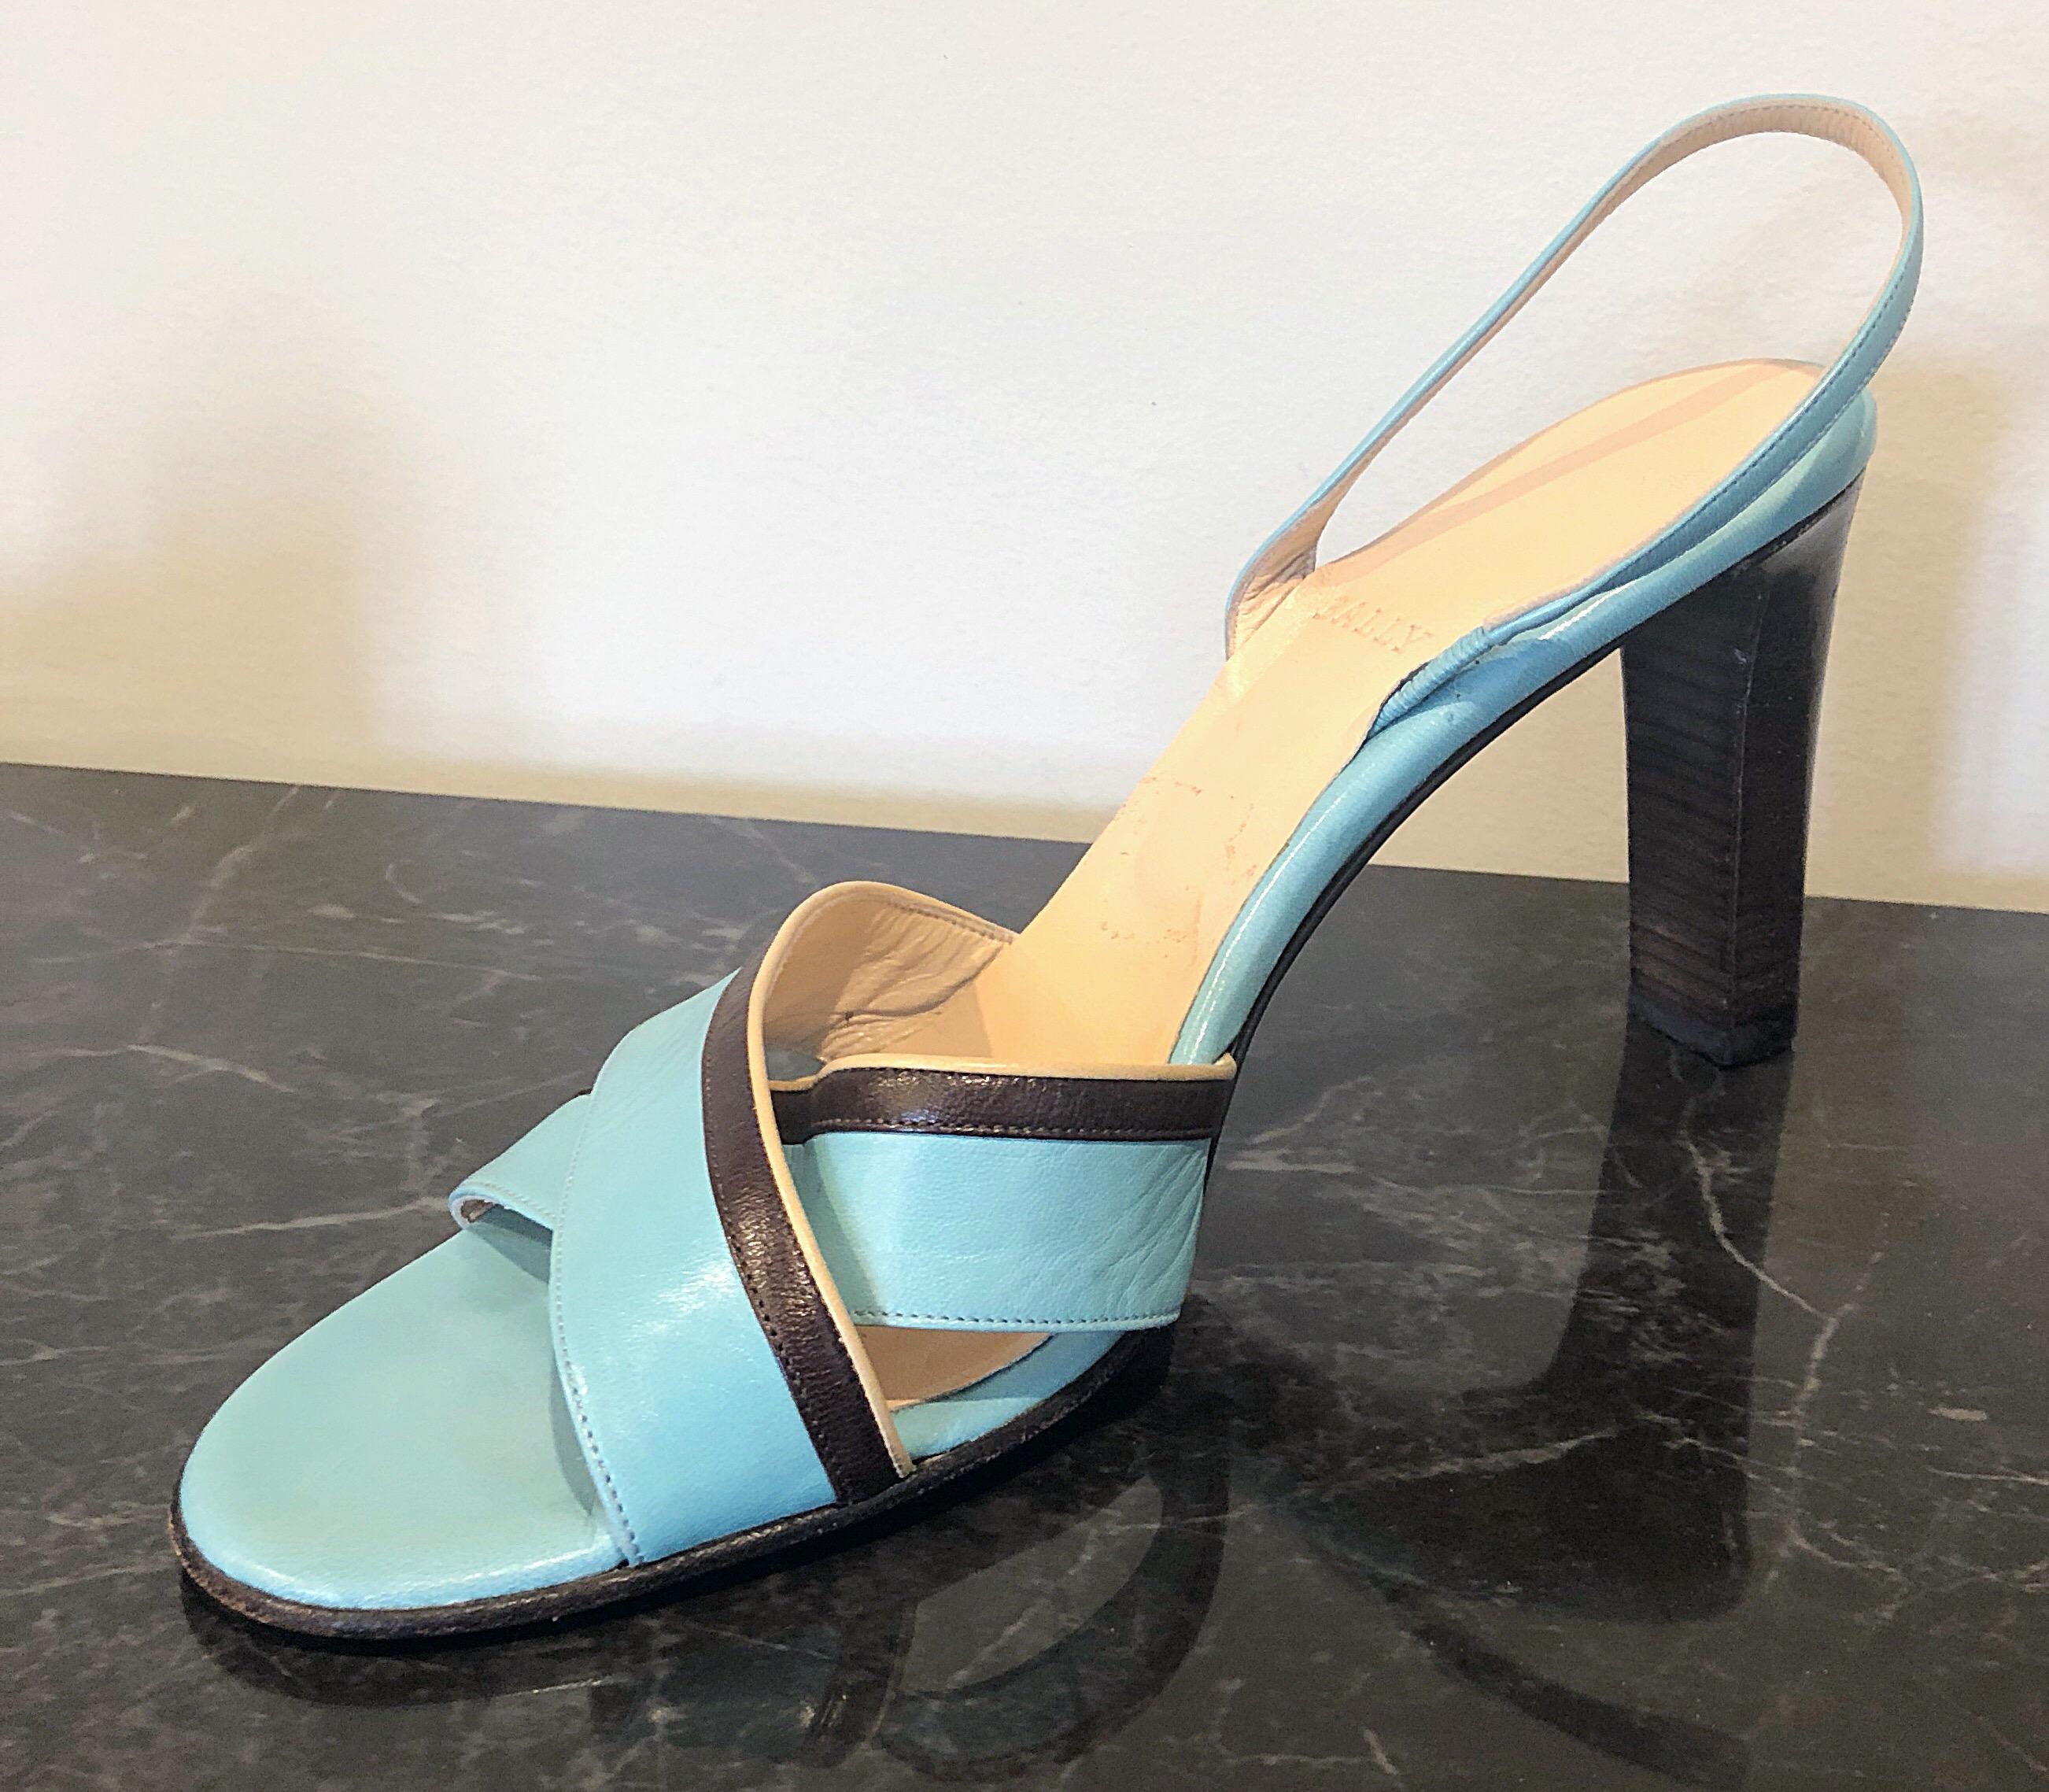 Women's 1990s Bally Sz 10 / 40.5 Robins Egg Blue Leather Vintage Stacked Heel Sandals For Sale